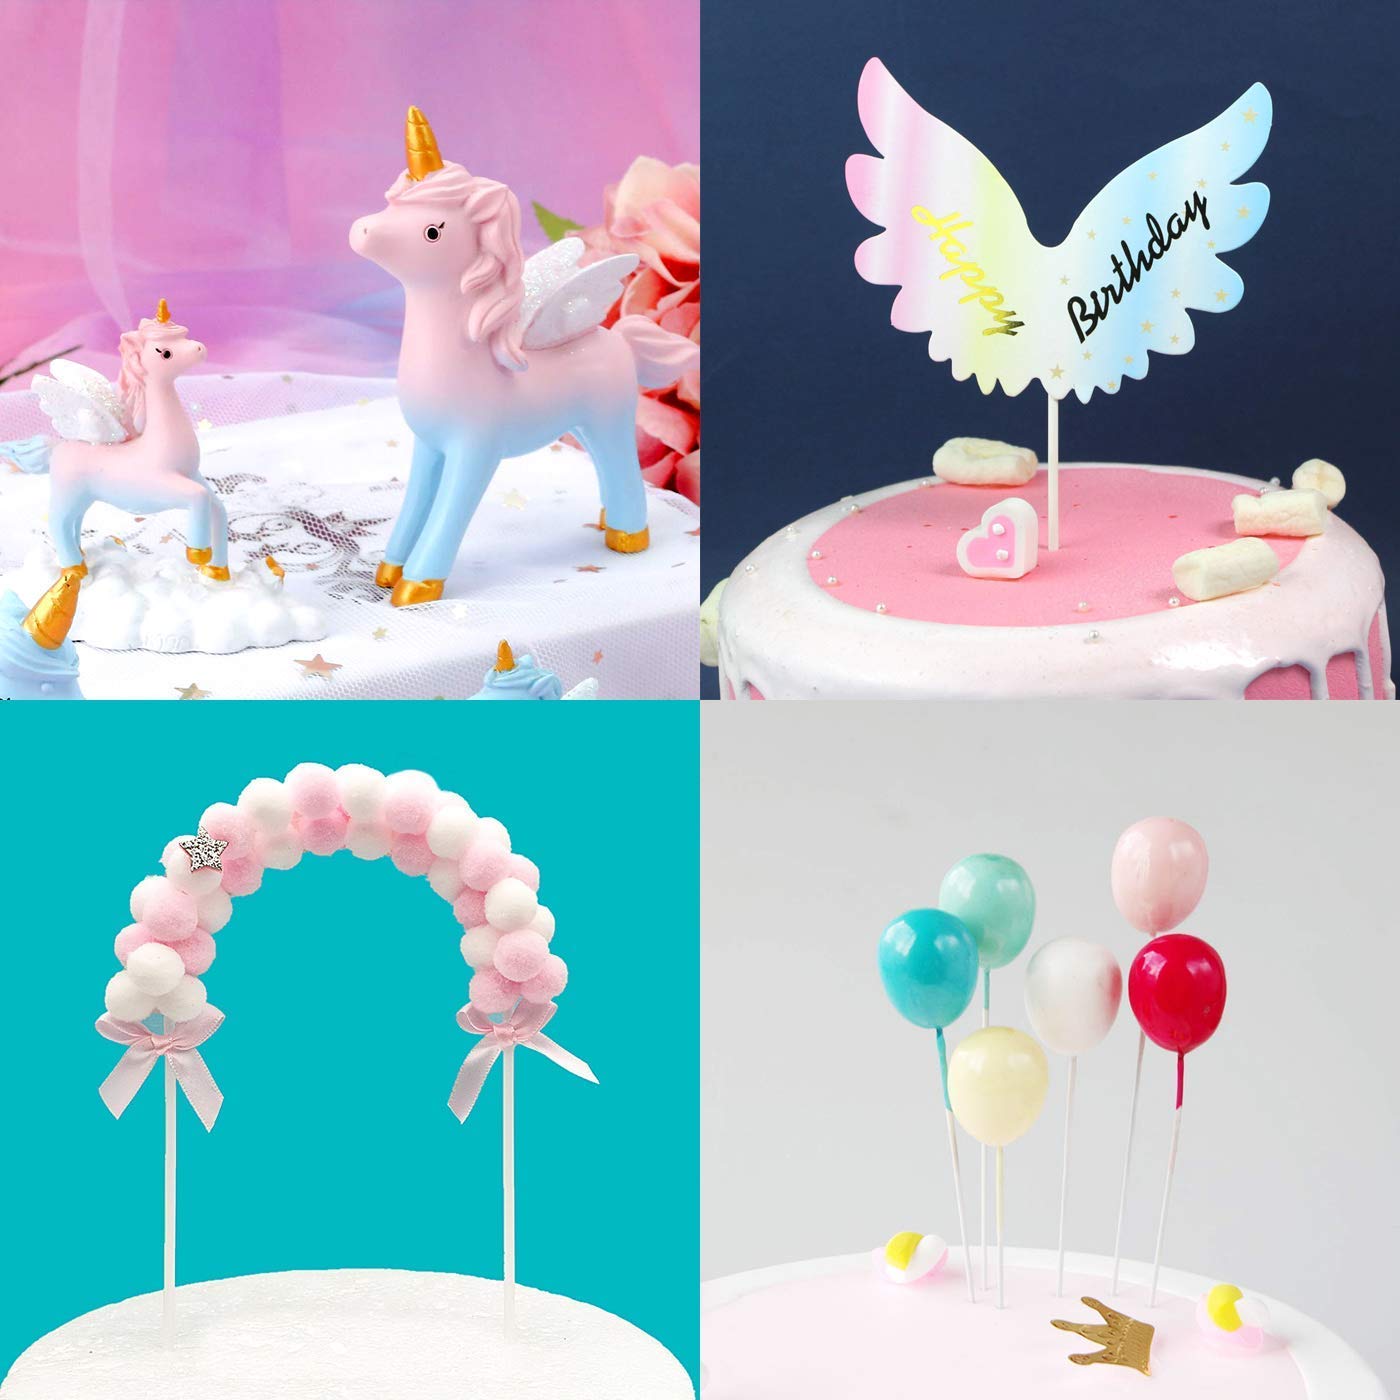 SUNSHINETEK Unicorn Cake Topper Set with Wings / Gold Glitter Unicorn Horn  / Sparkling Colourful Wings / Ears / Eyelashes for Party Supplies Birthday  Wedding Christmas: Amazon.de: Home & Kitchen